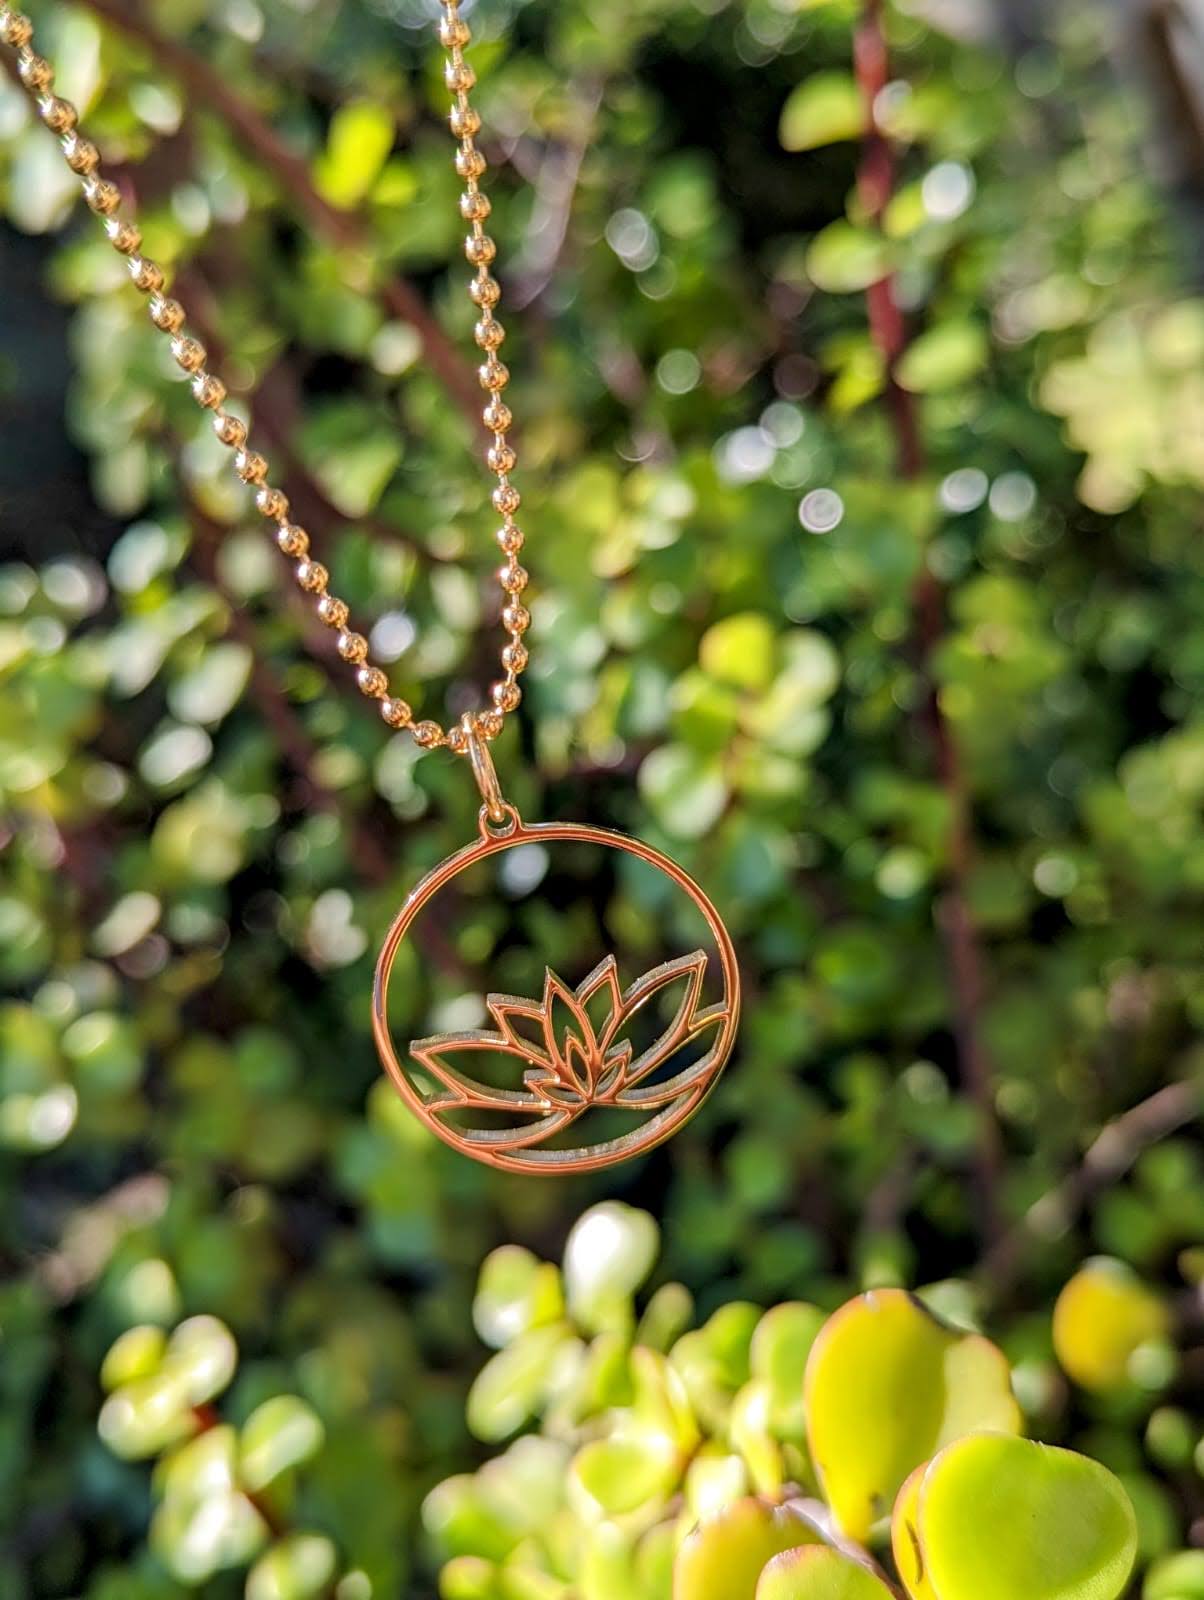 Stainless steel lotus charm necklace gold